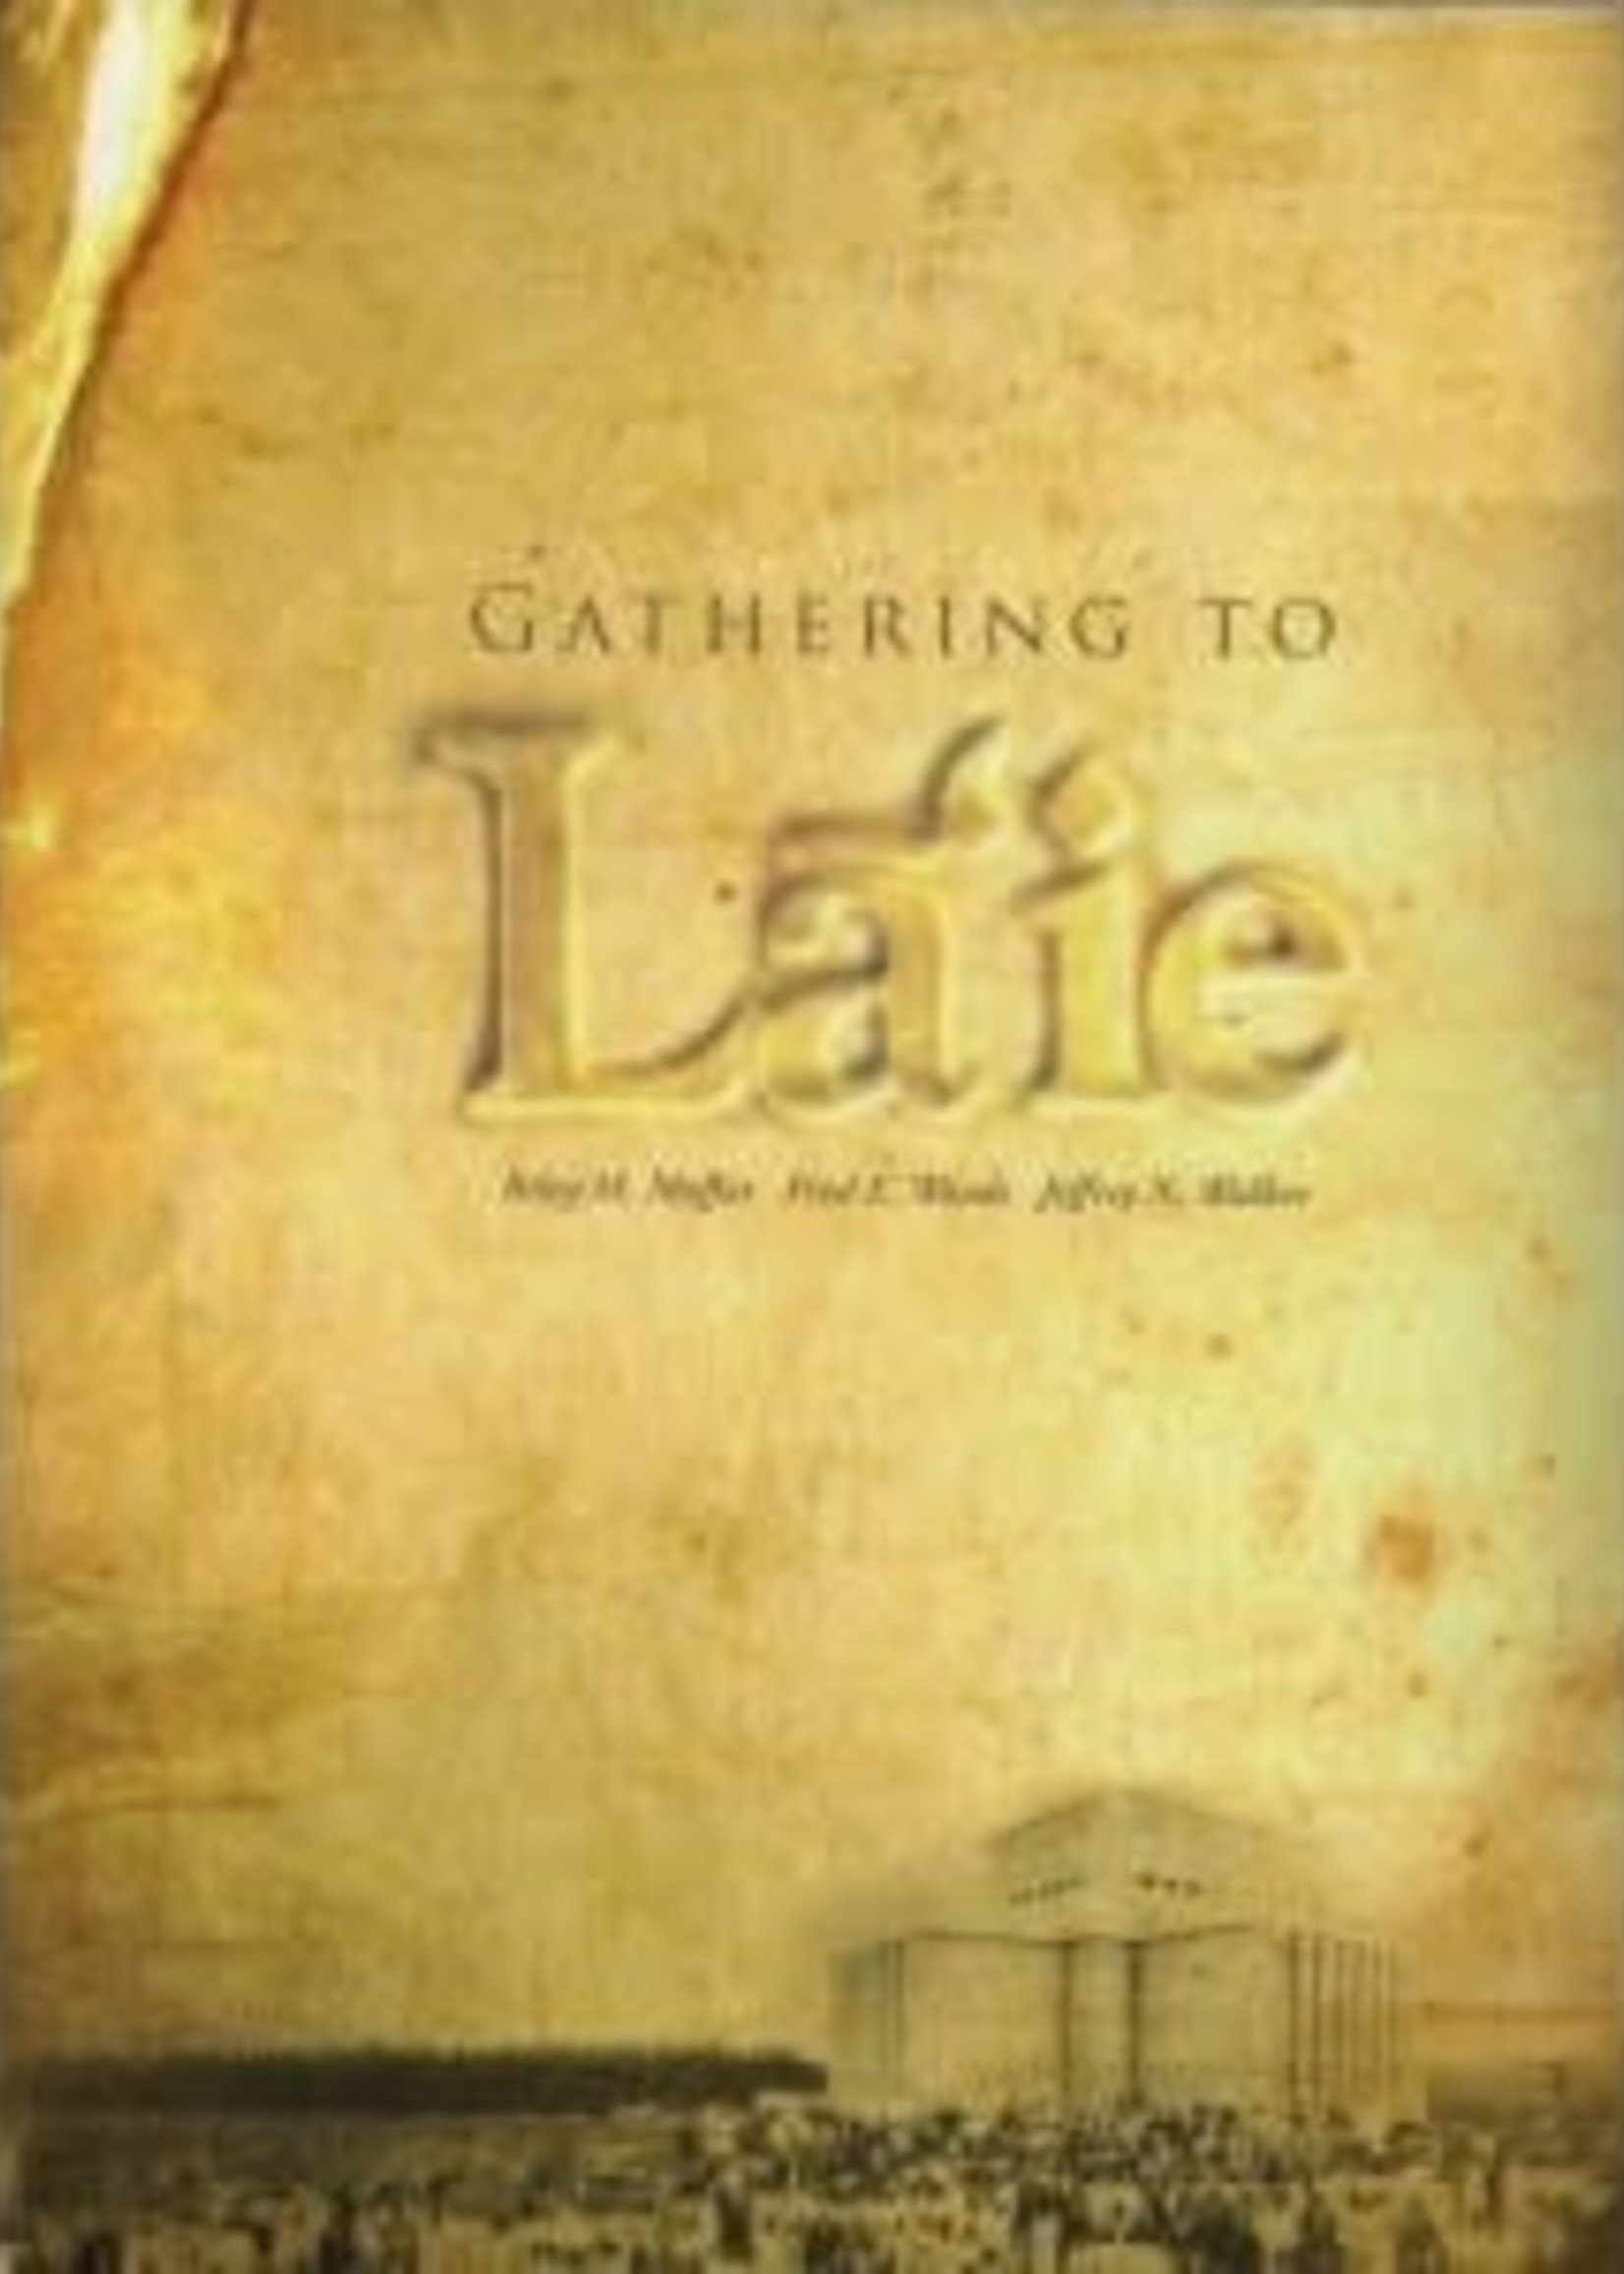 Gathering to Laie